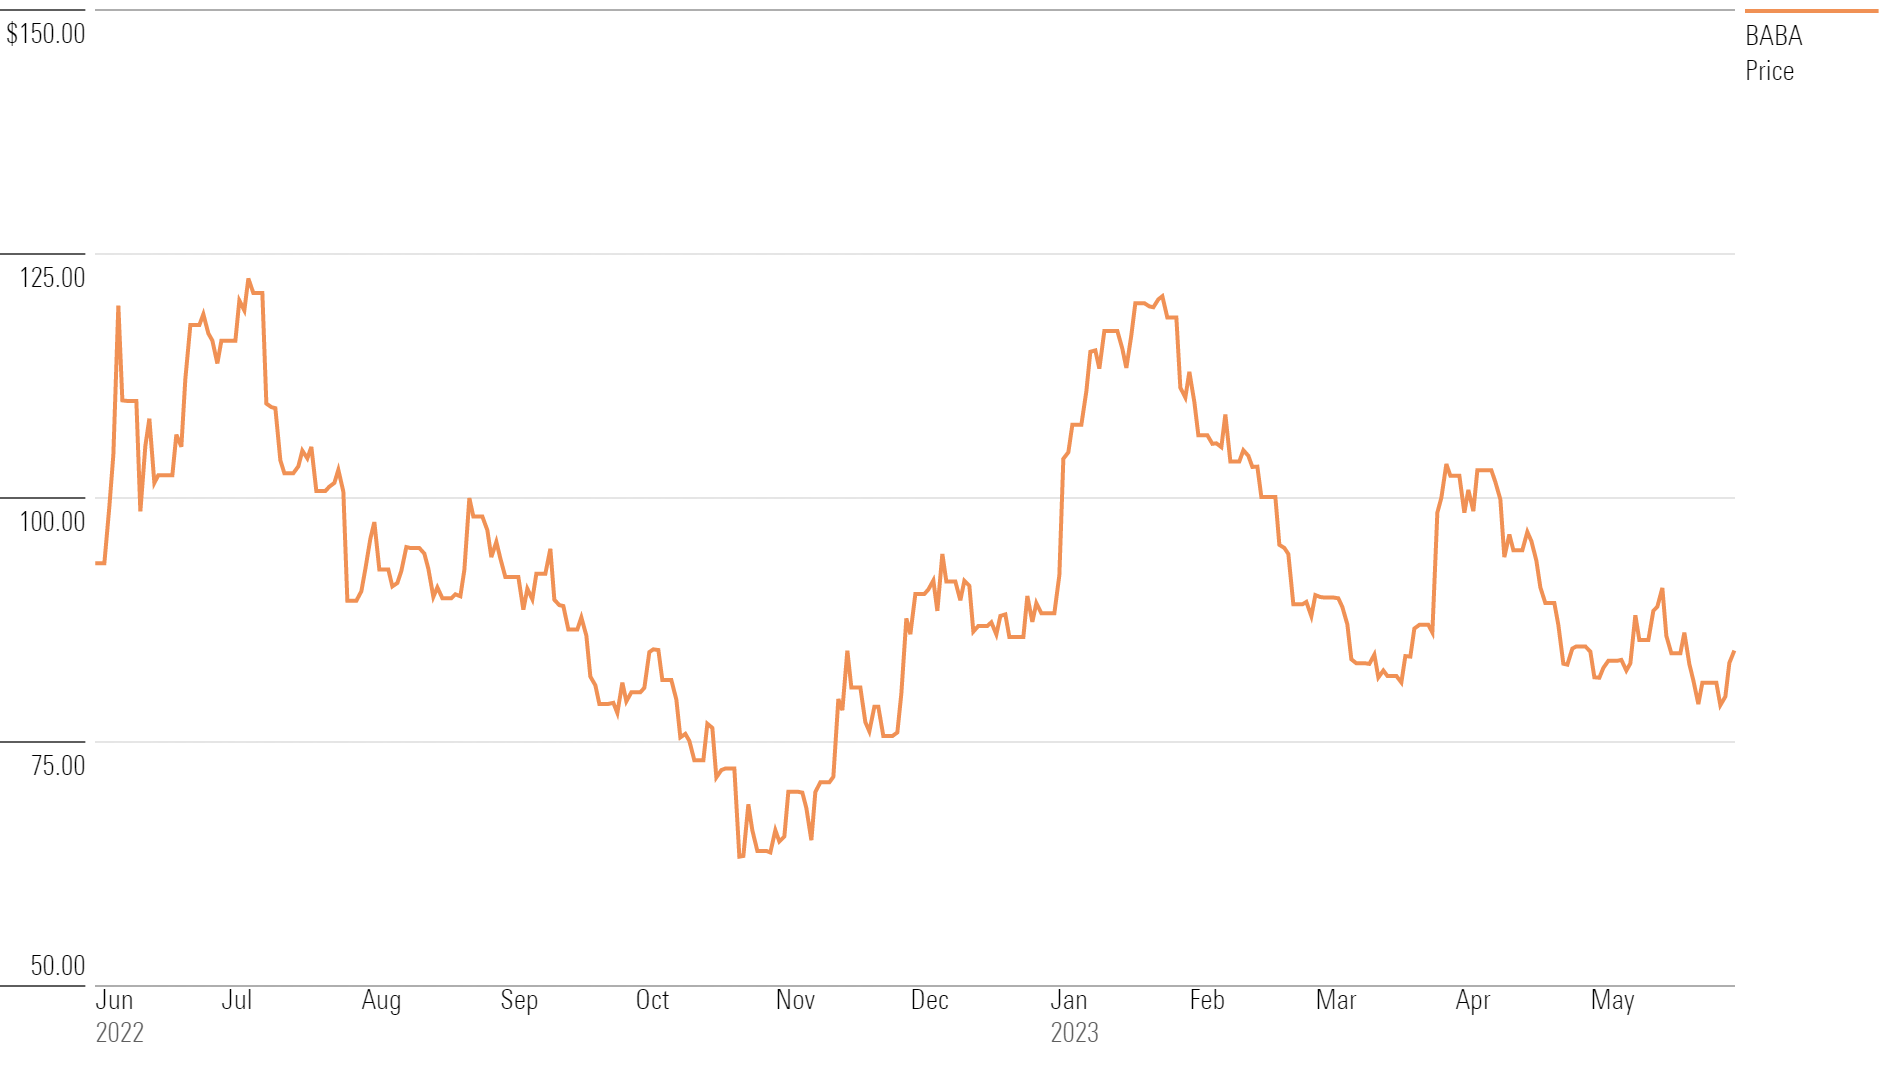 A line chart of Alibaba's stock price over one year.